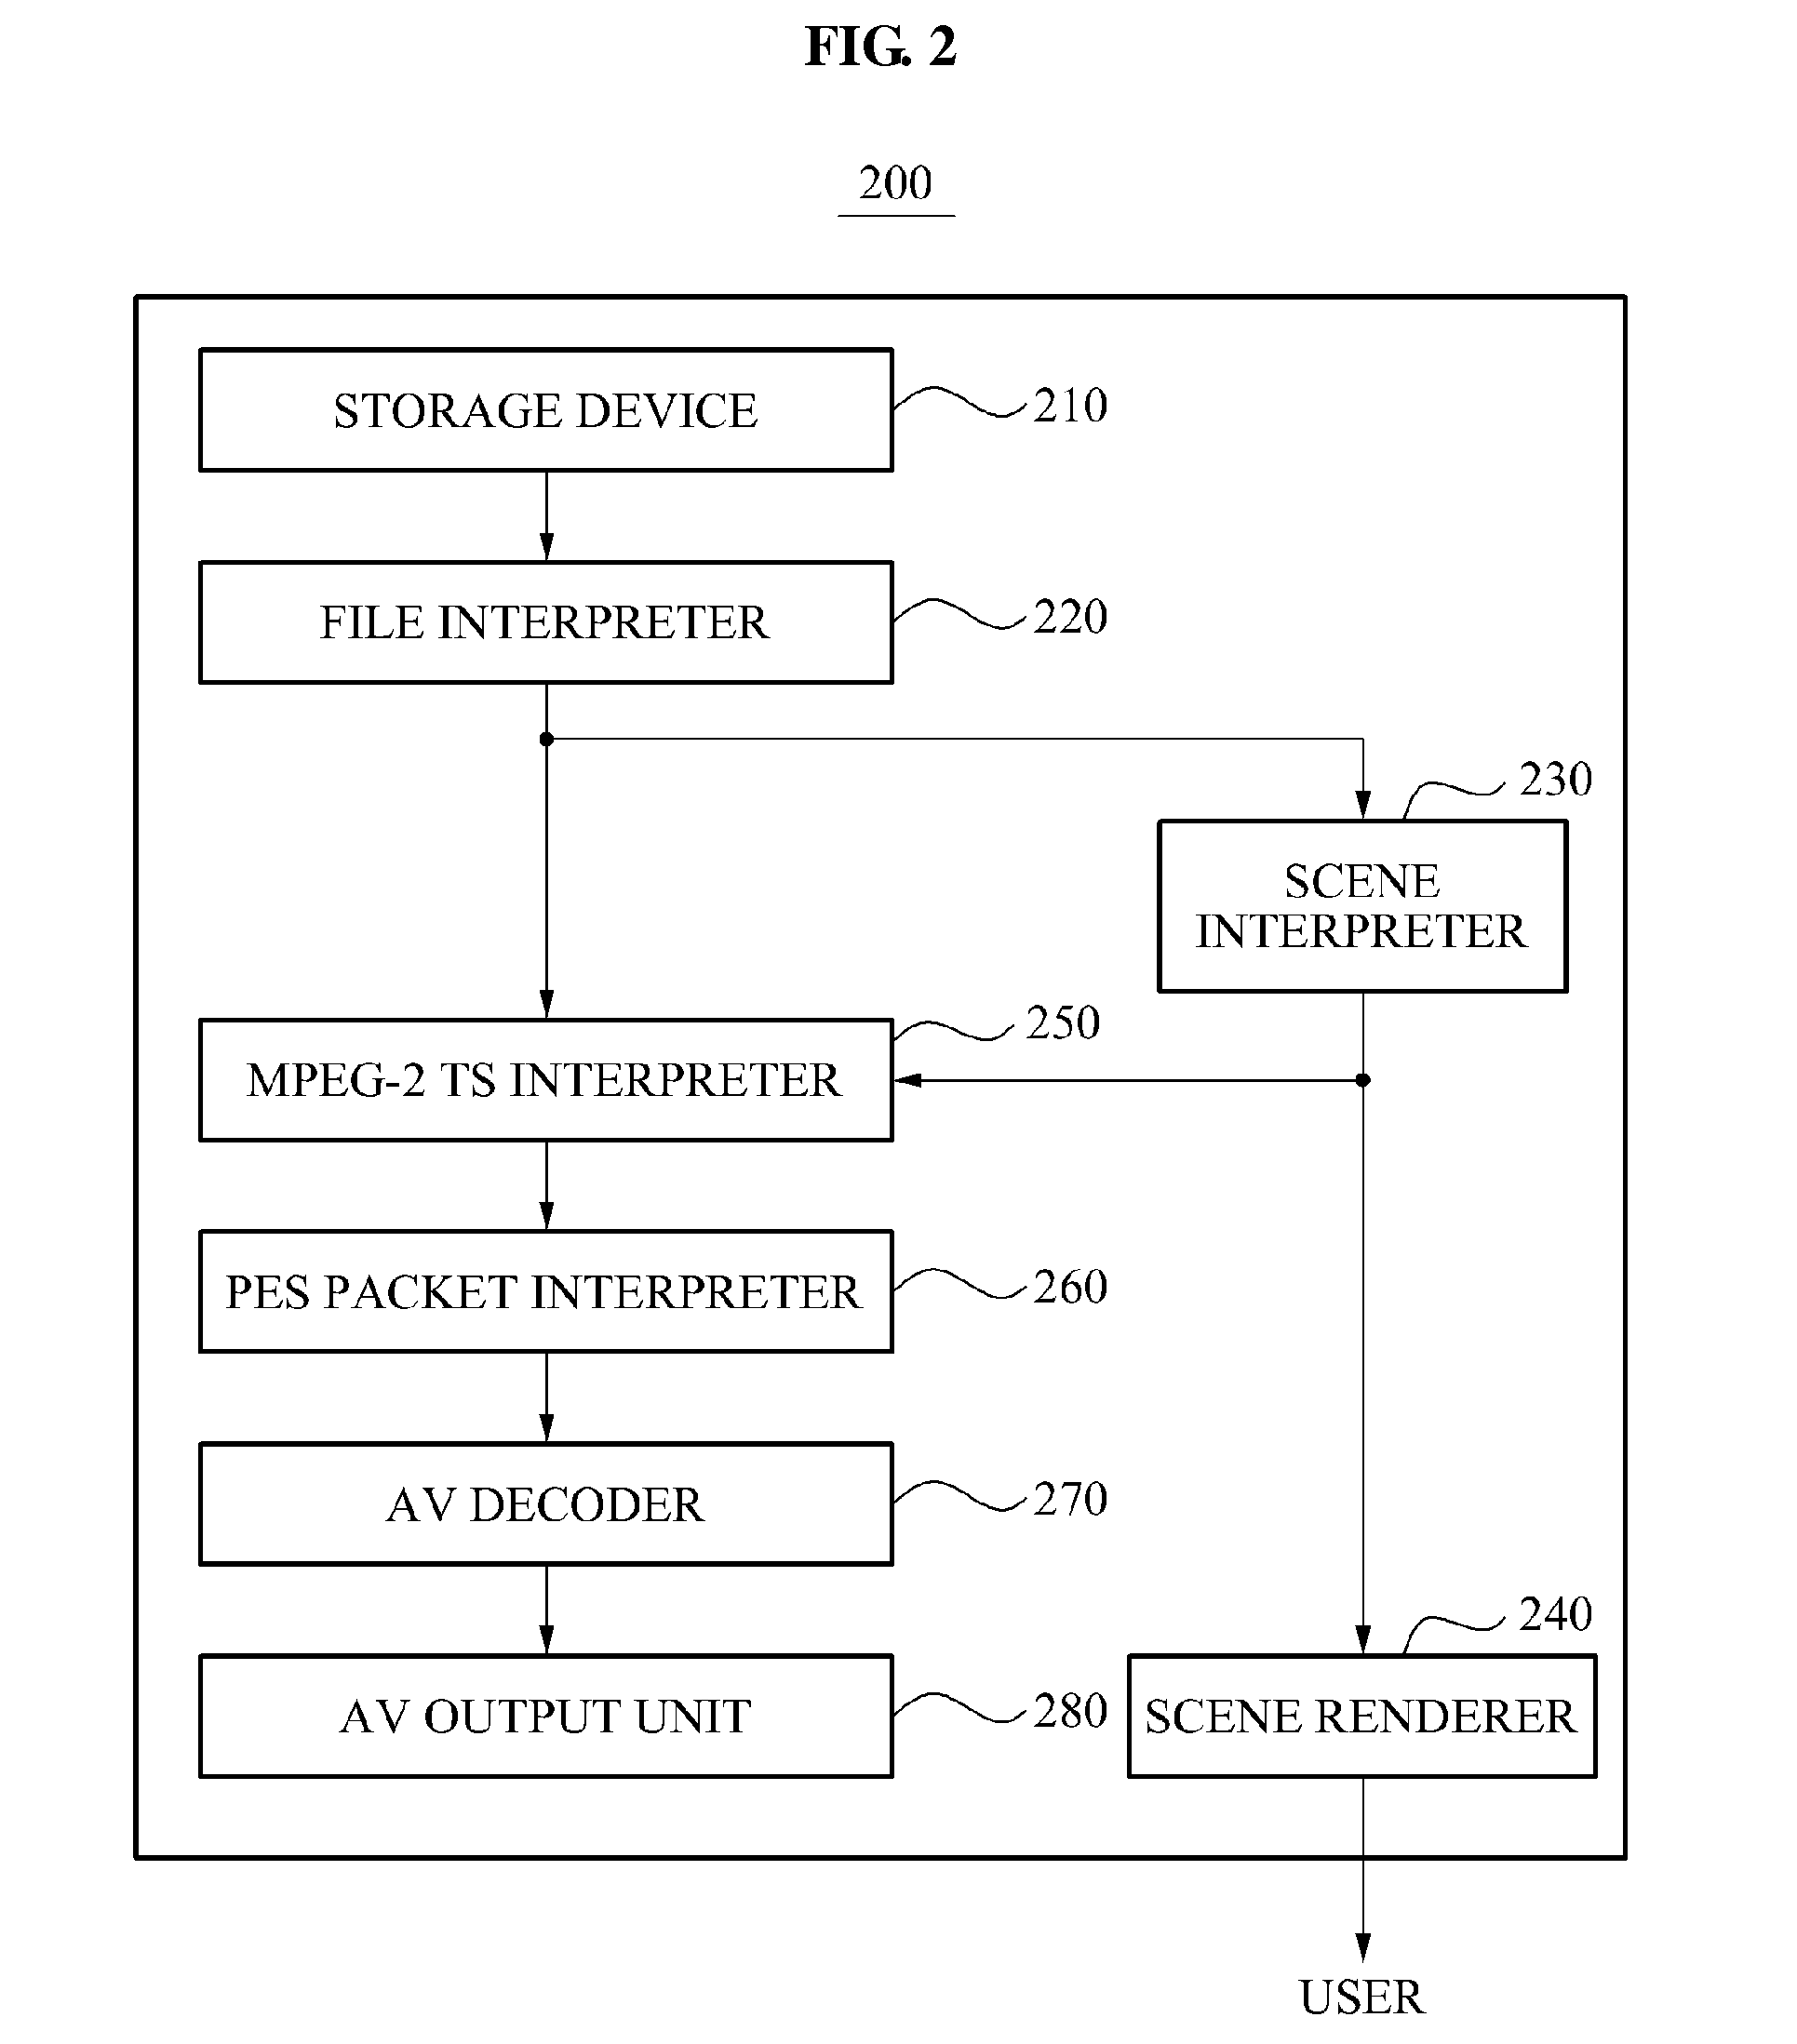 Apparatus and method for producing/regenerating contents including mpeg-2 transport streams using screen description